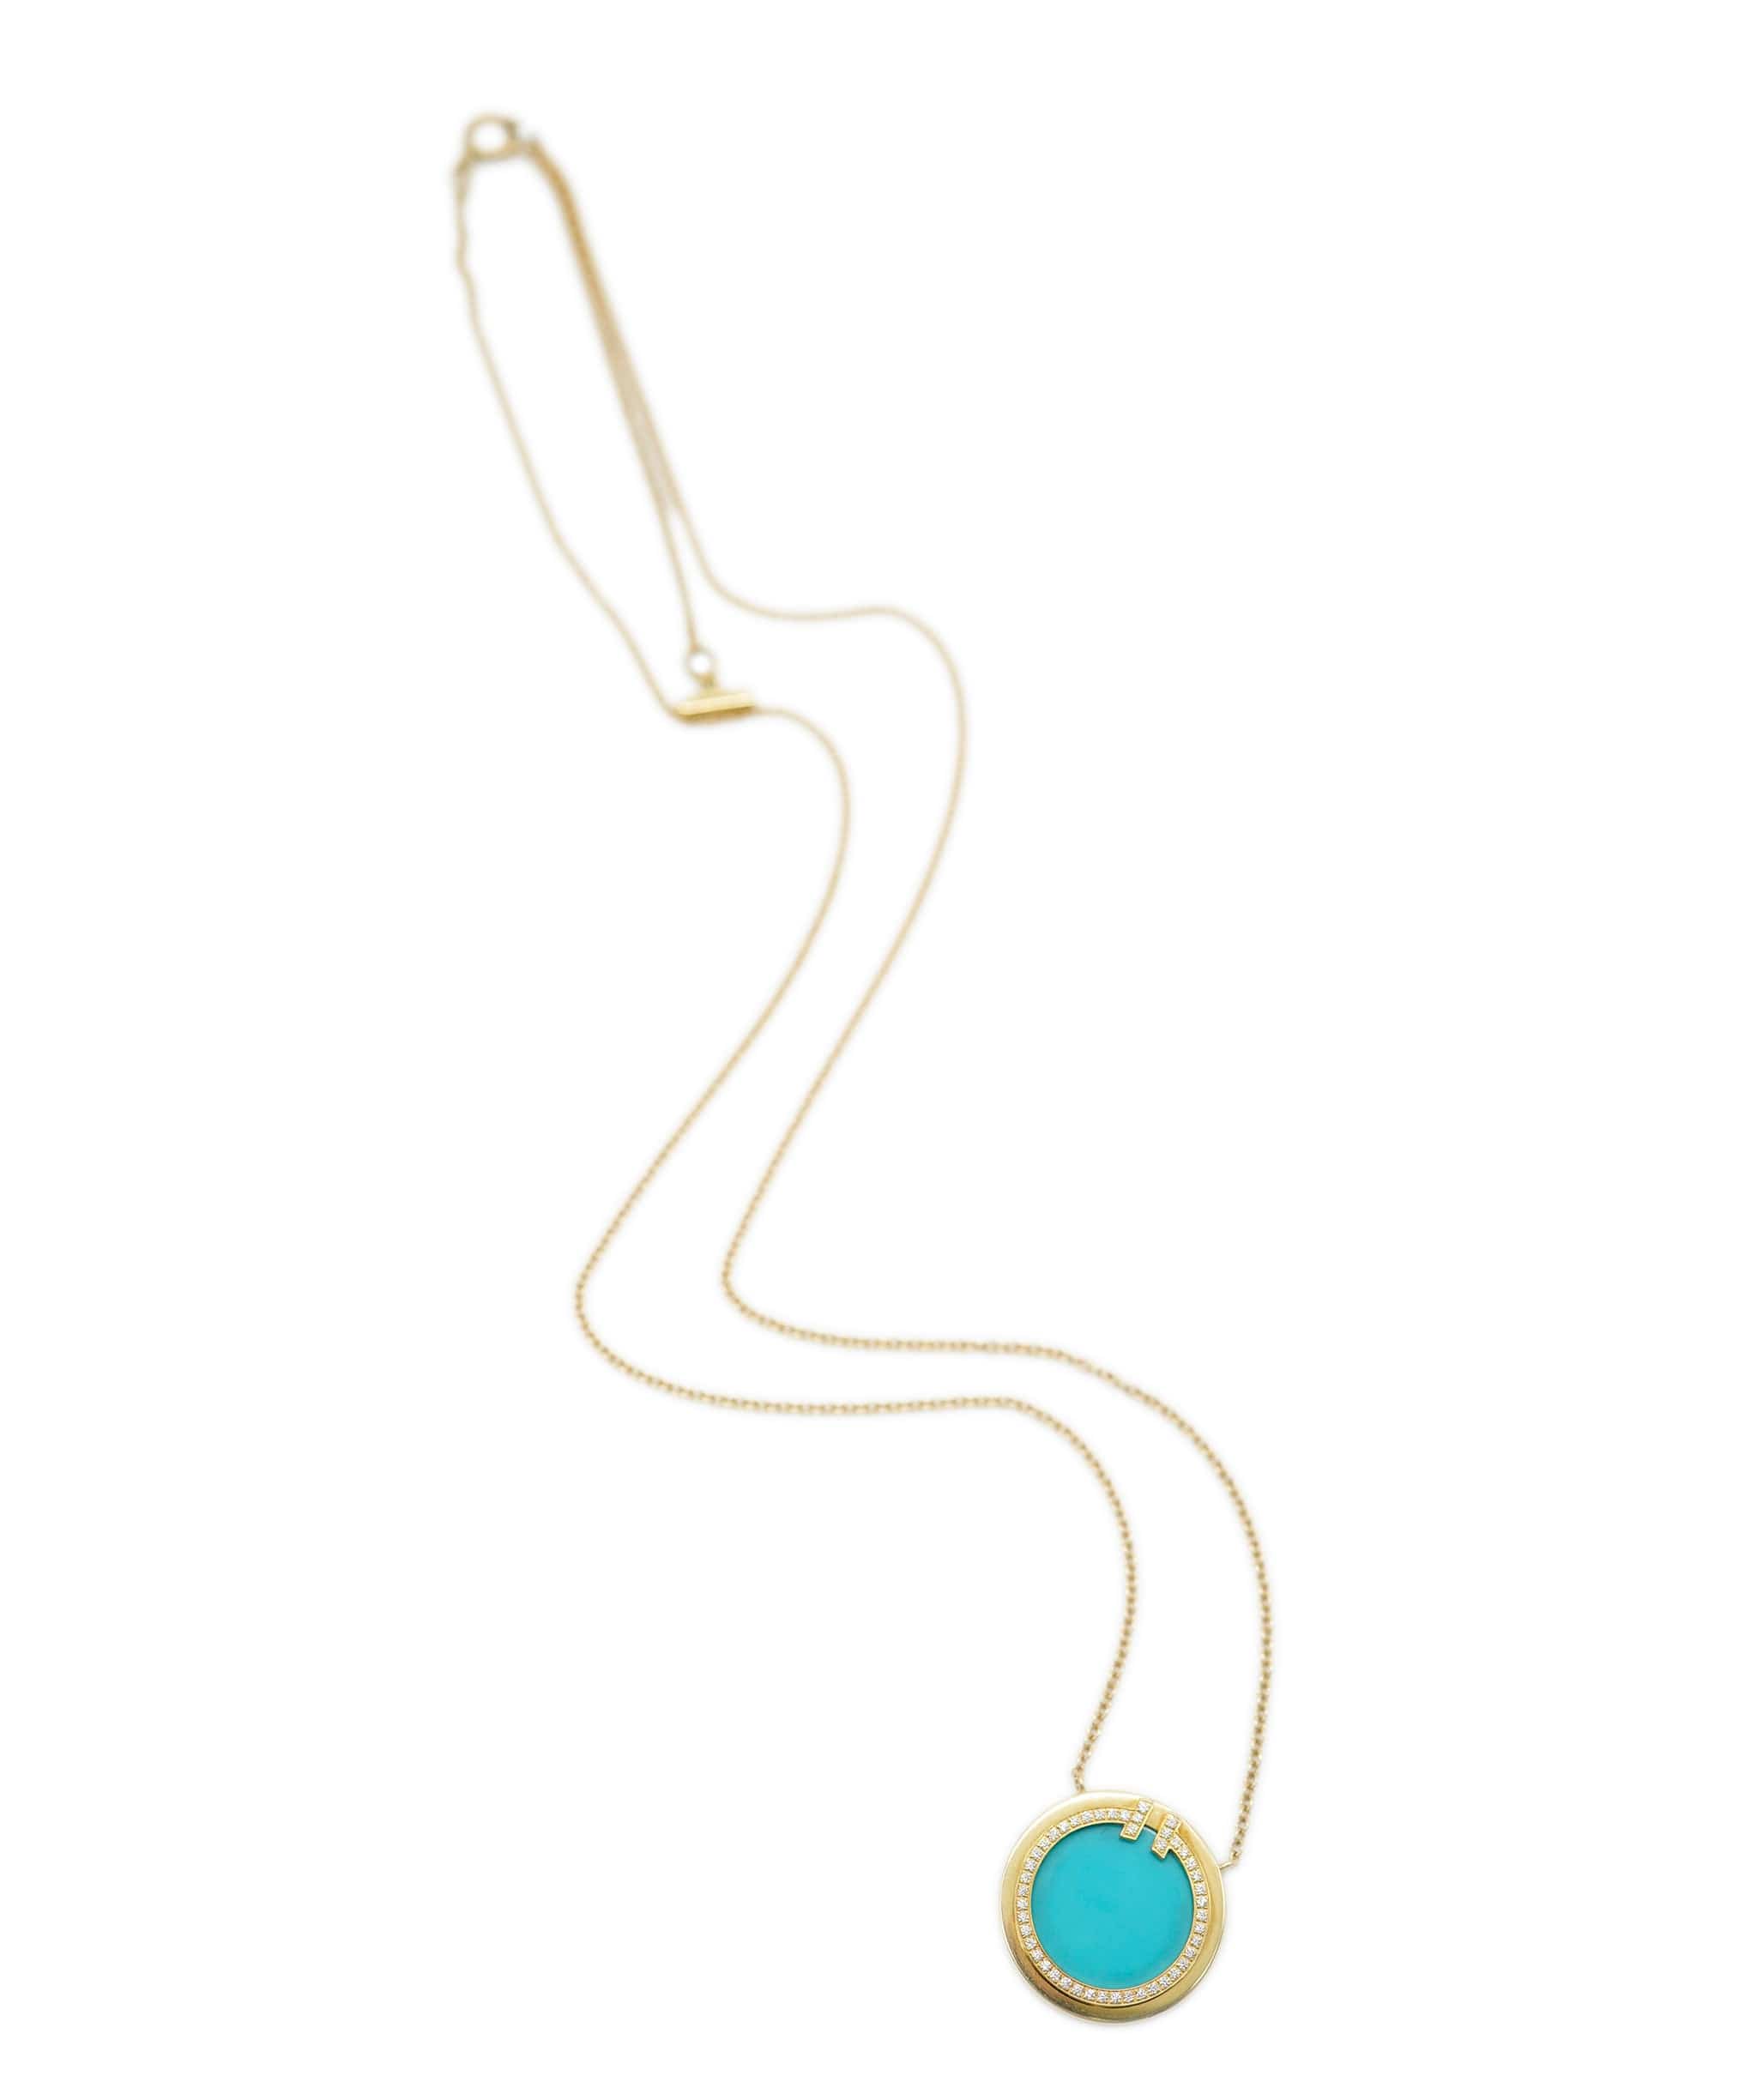 Tiffany & Co. Tiffany & Co. T Diamond, Turquoise and Yellow gold Circle Pendant Necklace AHC1926